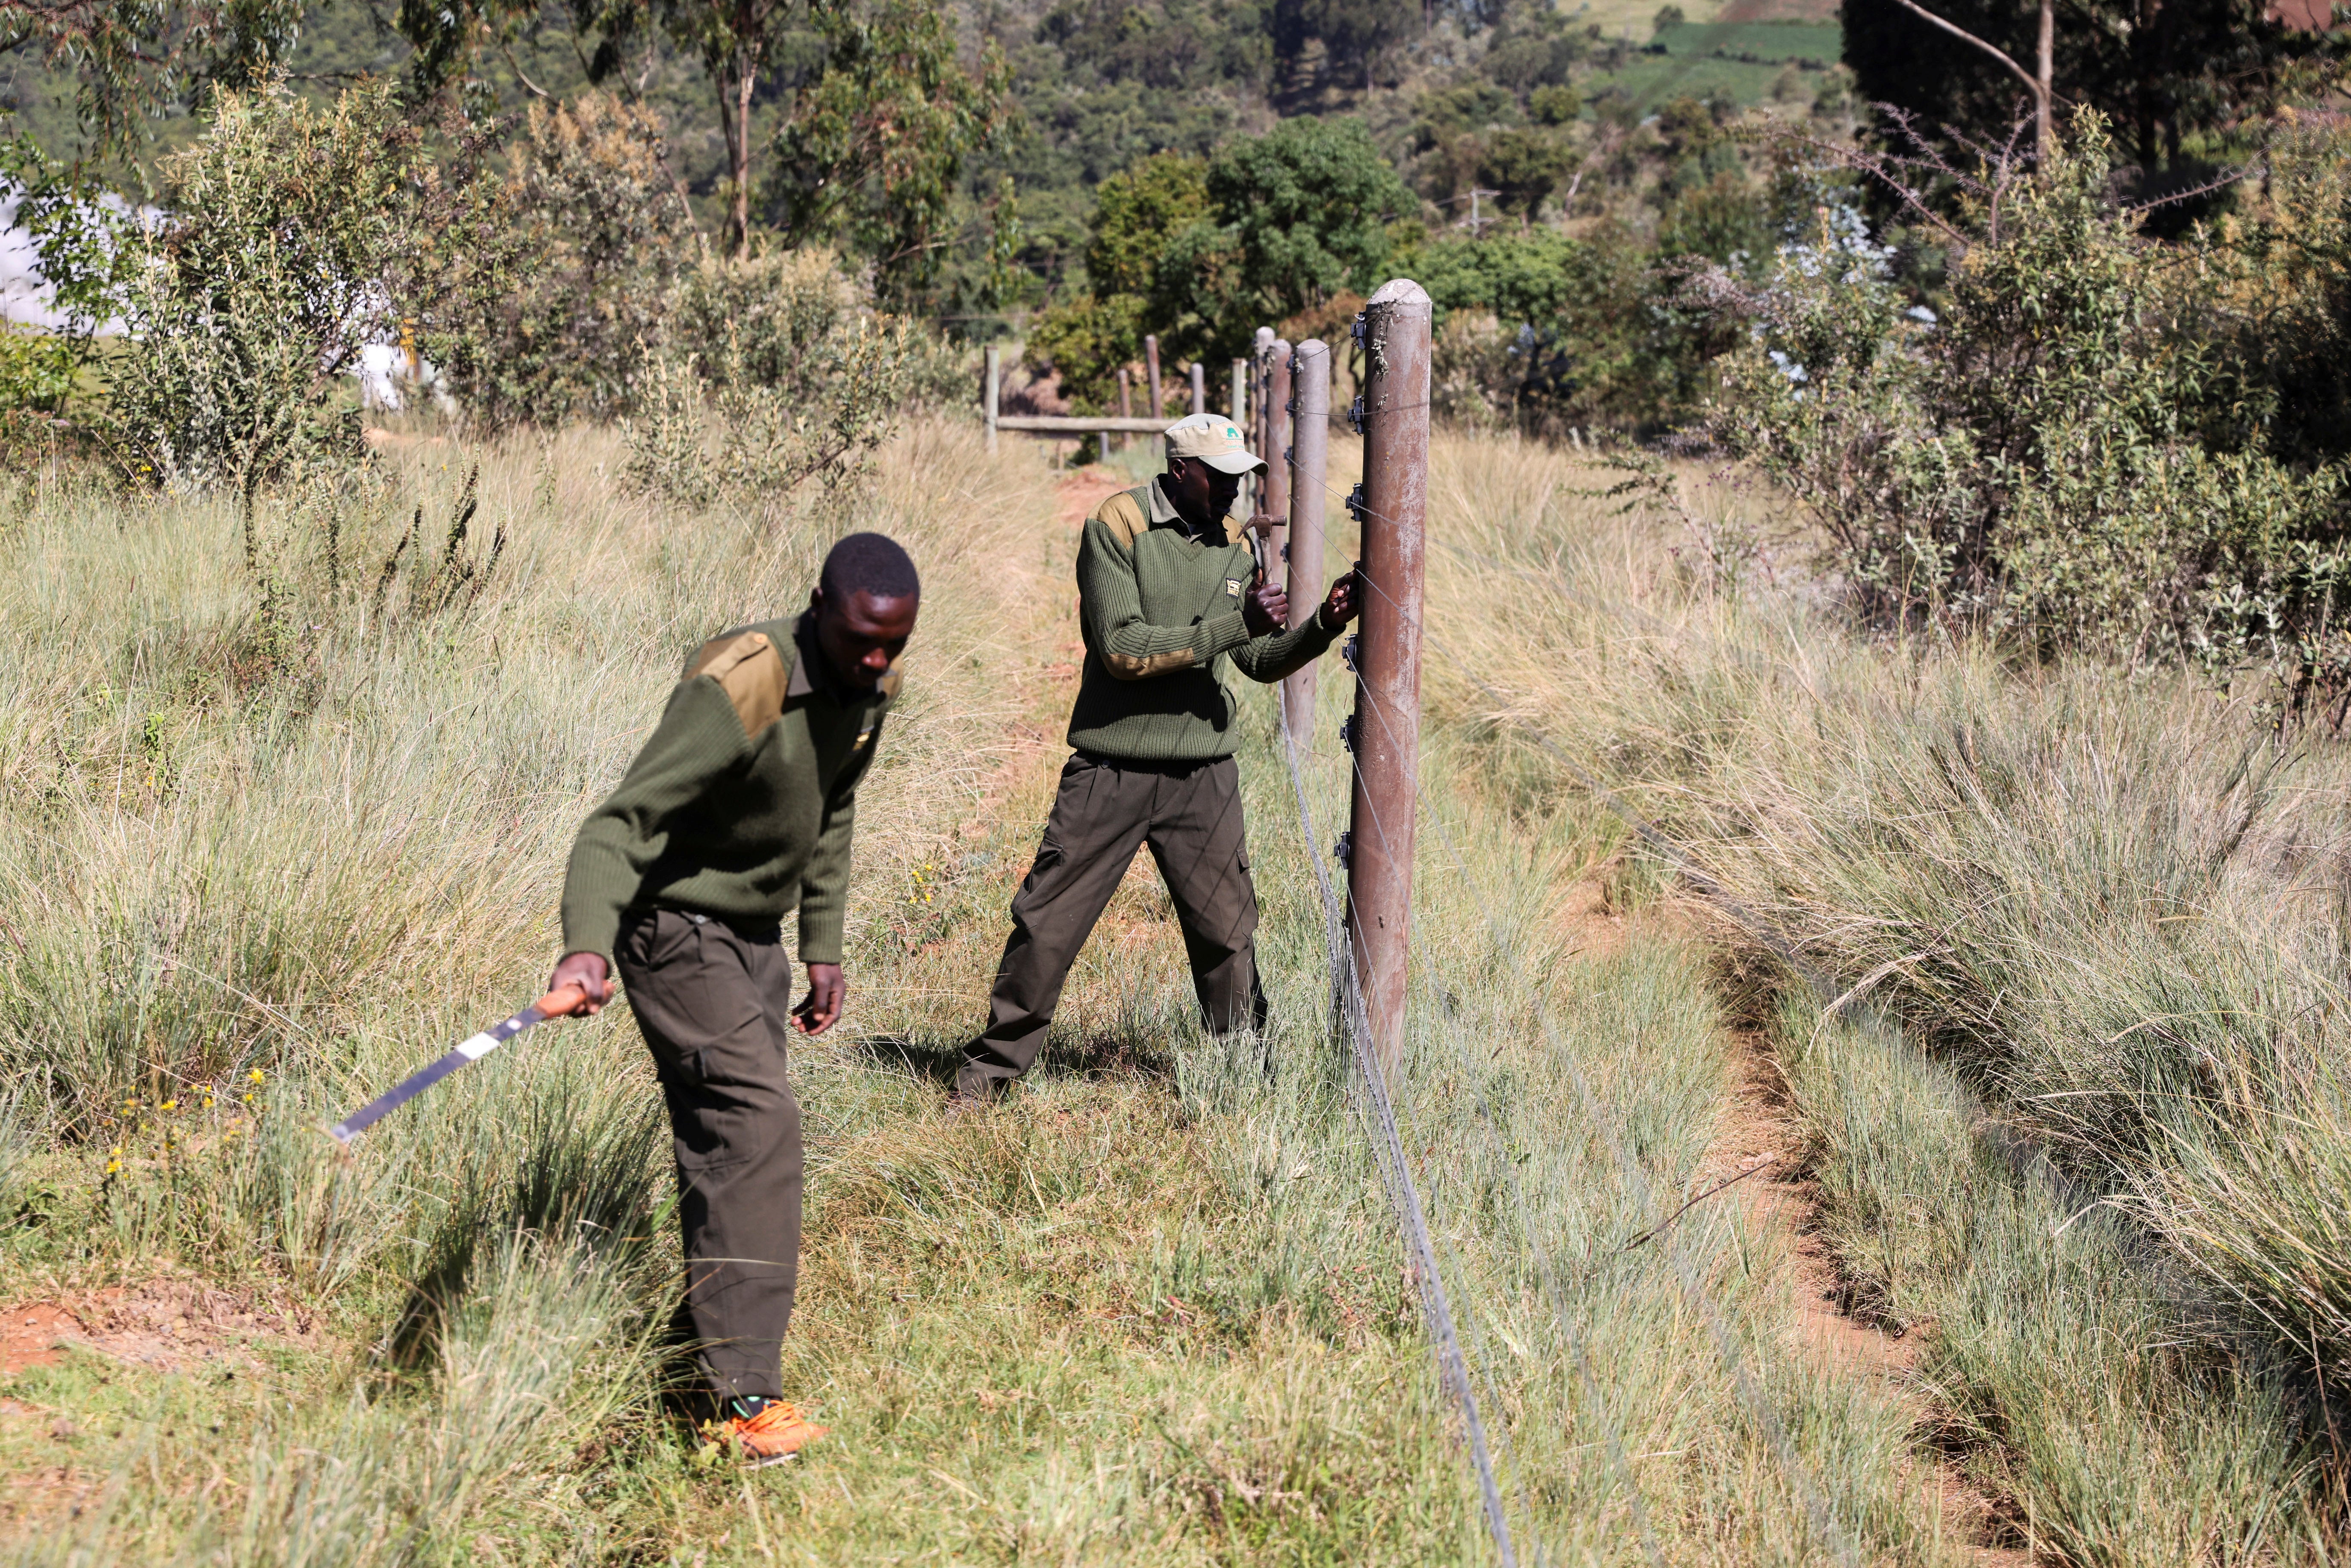 The Rhino Ark Trust has installed 280 miles of fences around Kenyan forests